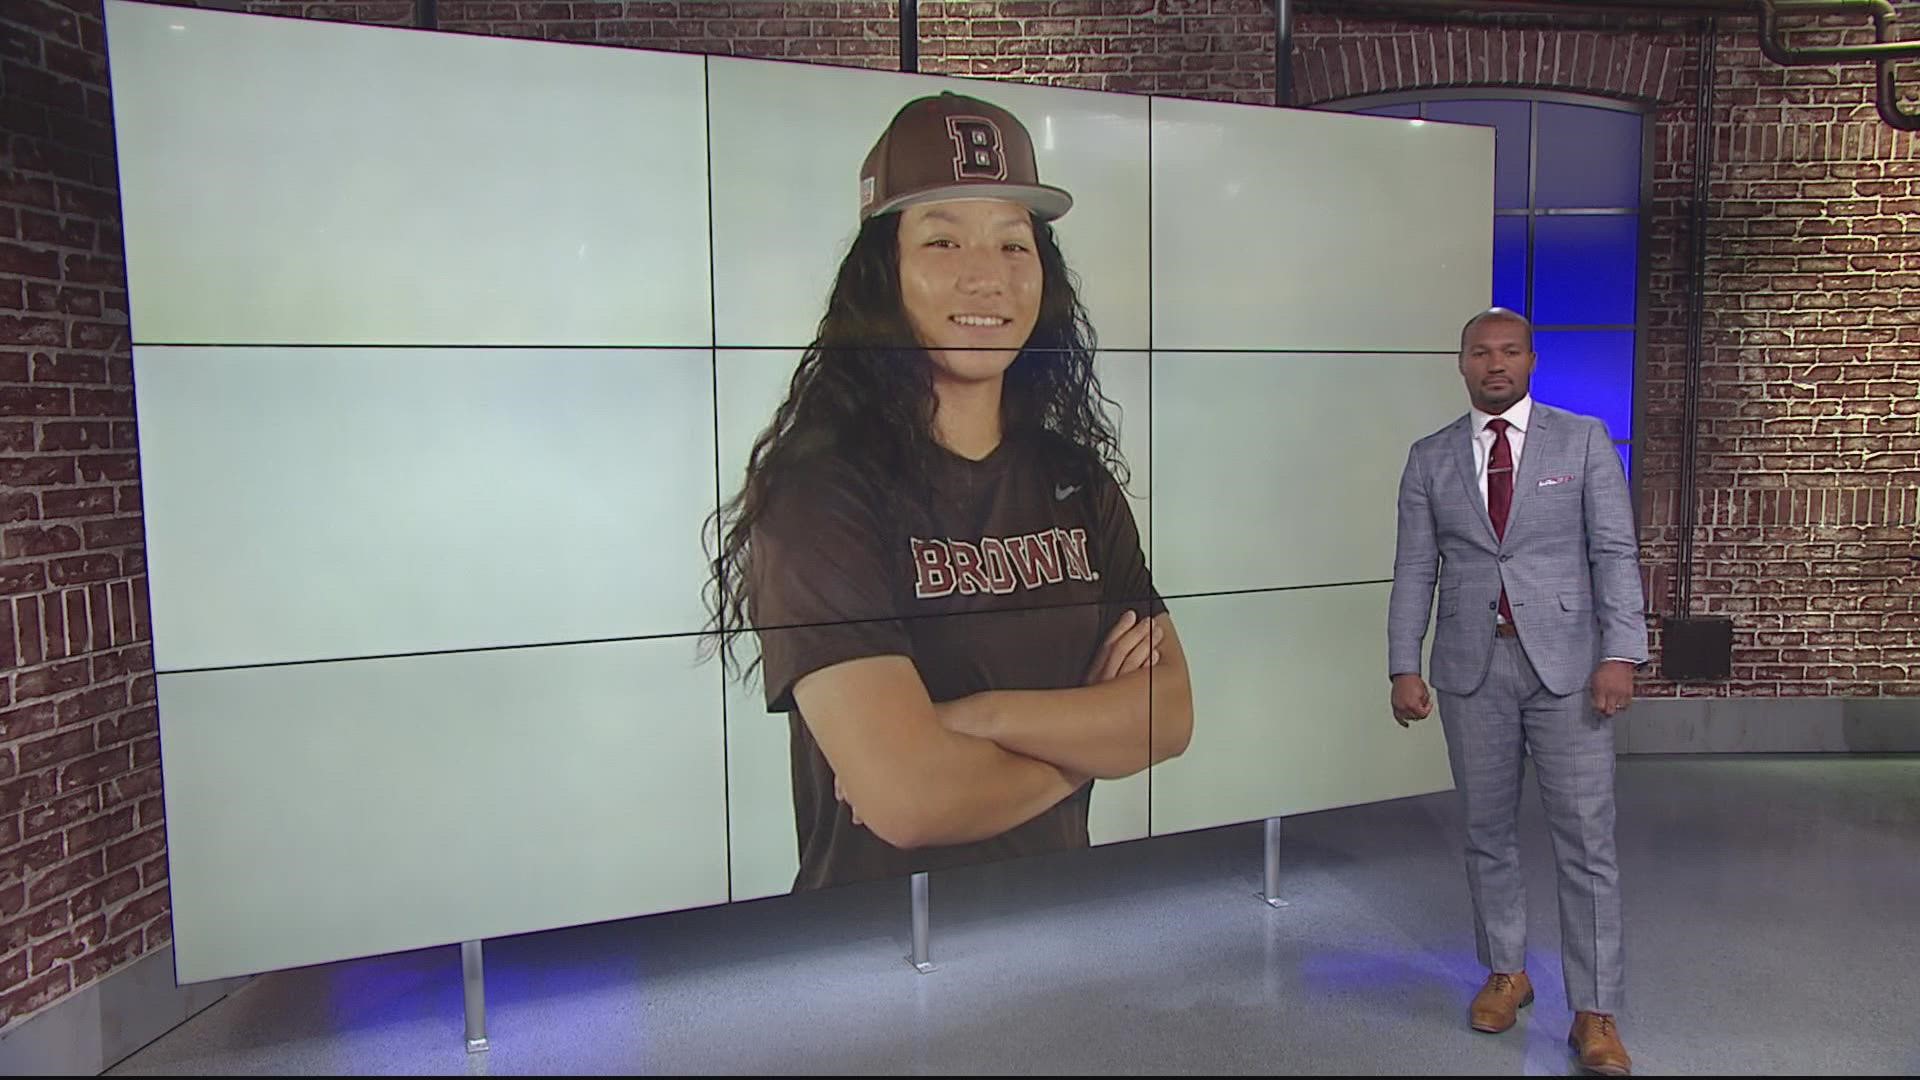 Brown University freshman Olivia Pichardo is making history as the first woman to make a Division I baseball roster.